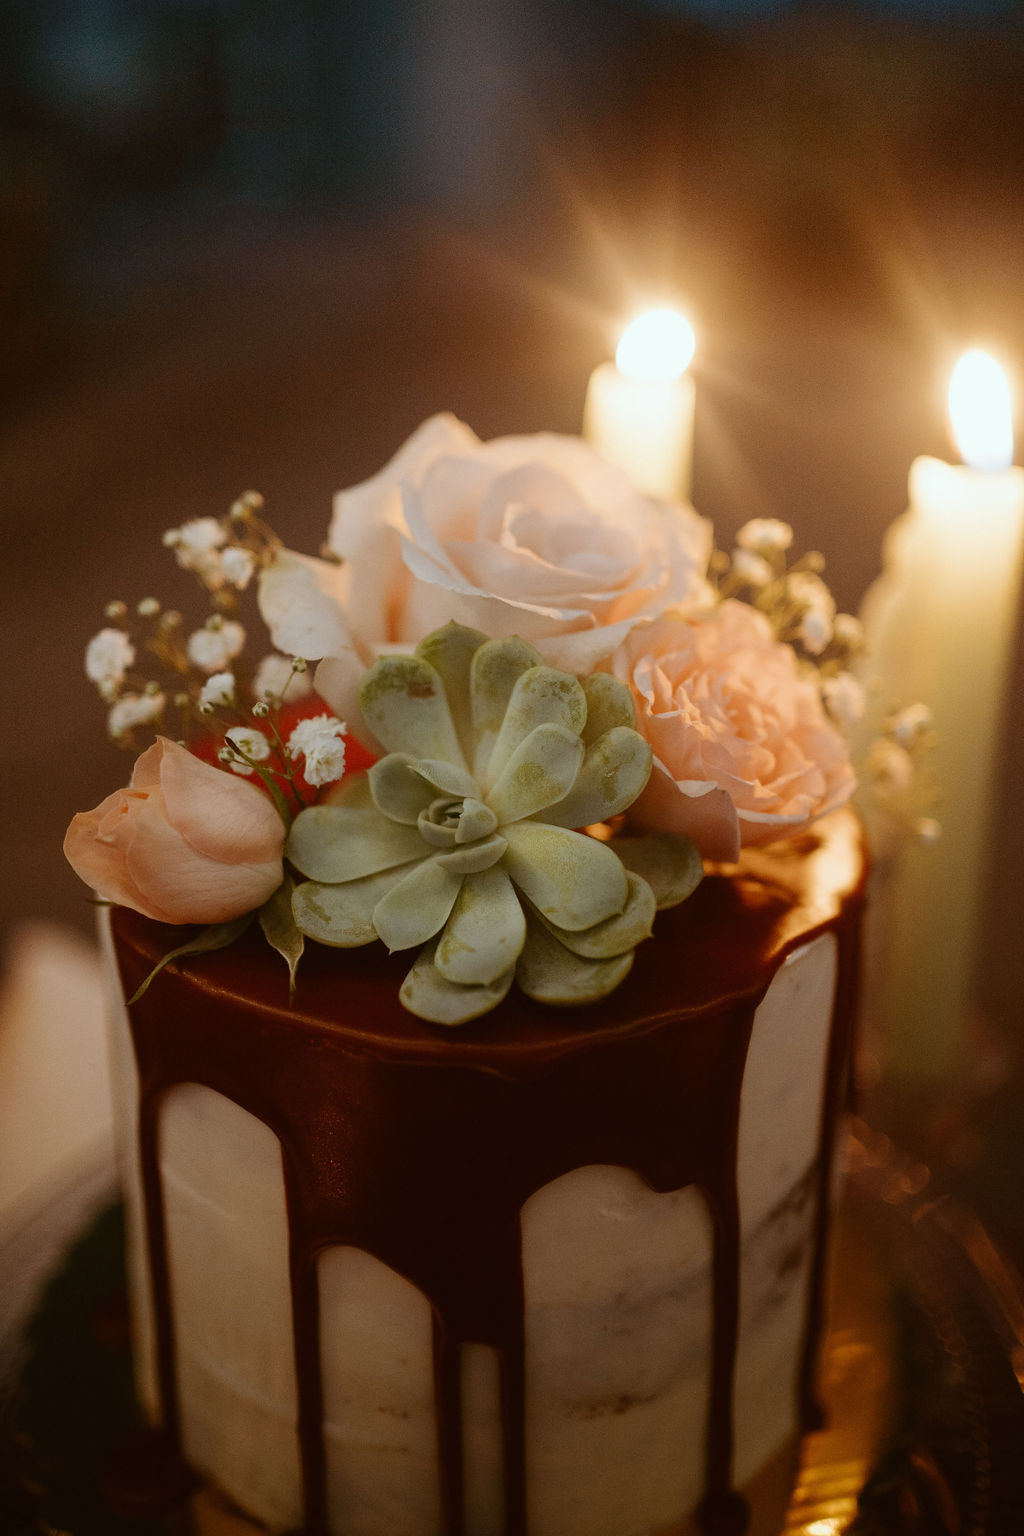 Drip Wedding Cake with Succulent and Roses and Candles for Cactus Joe's Micro-Wedding 